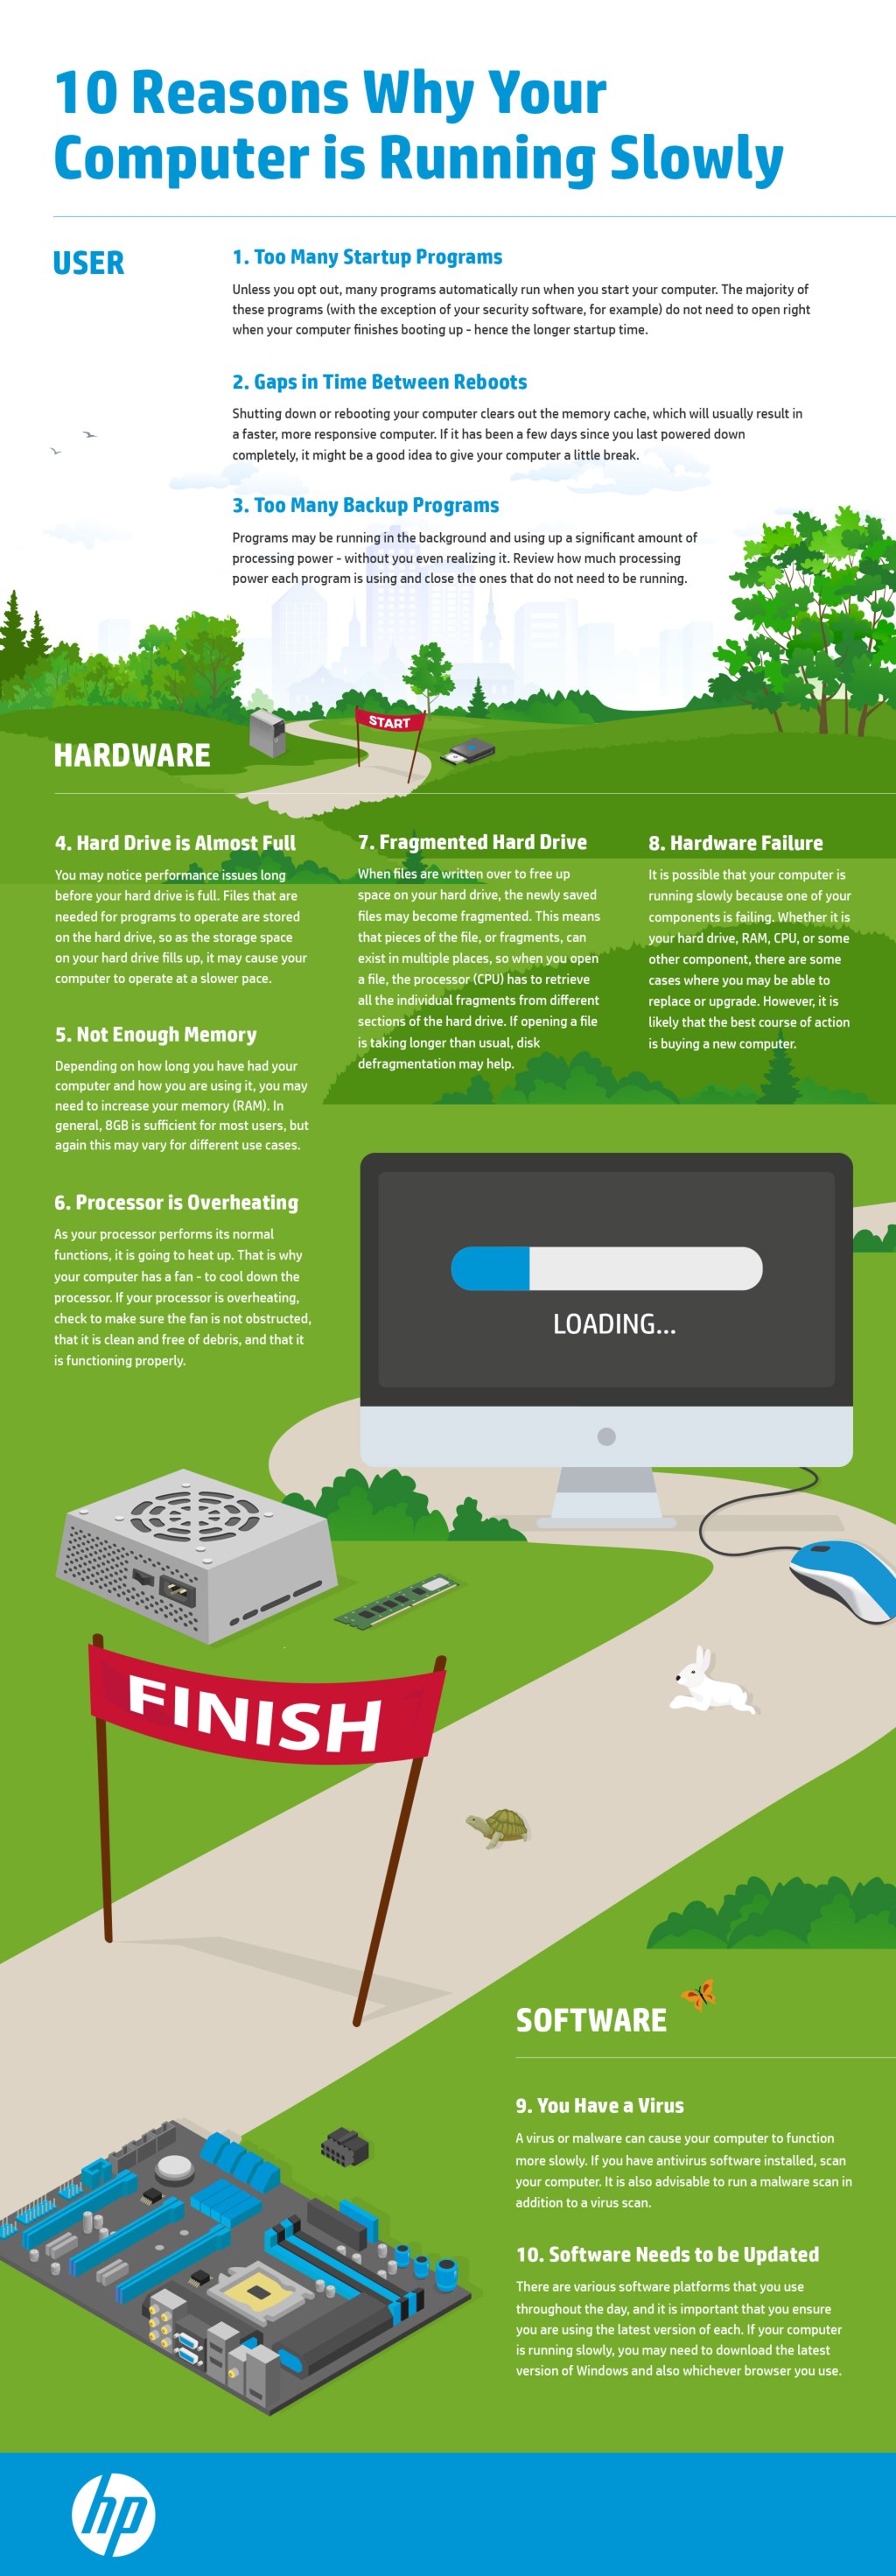 reasons why your computer is running slowly infographic